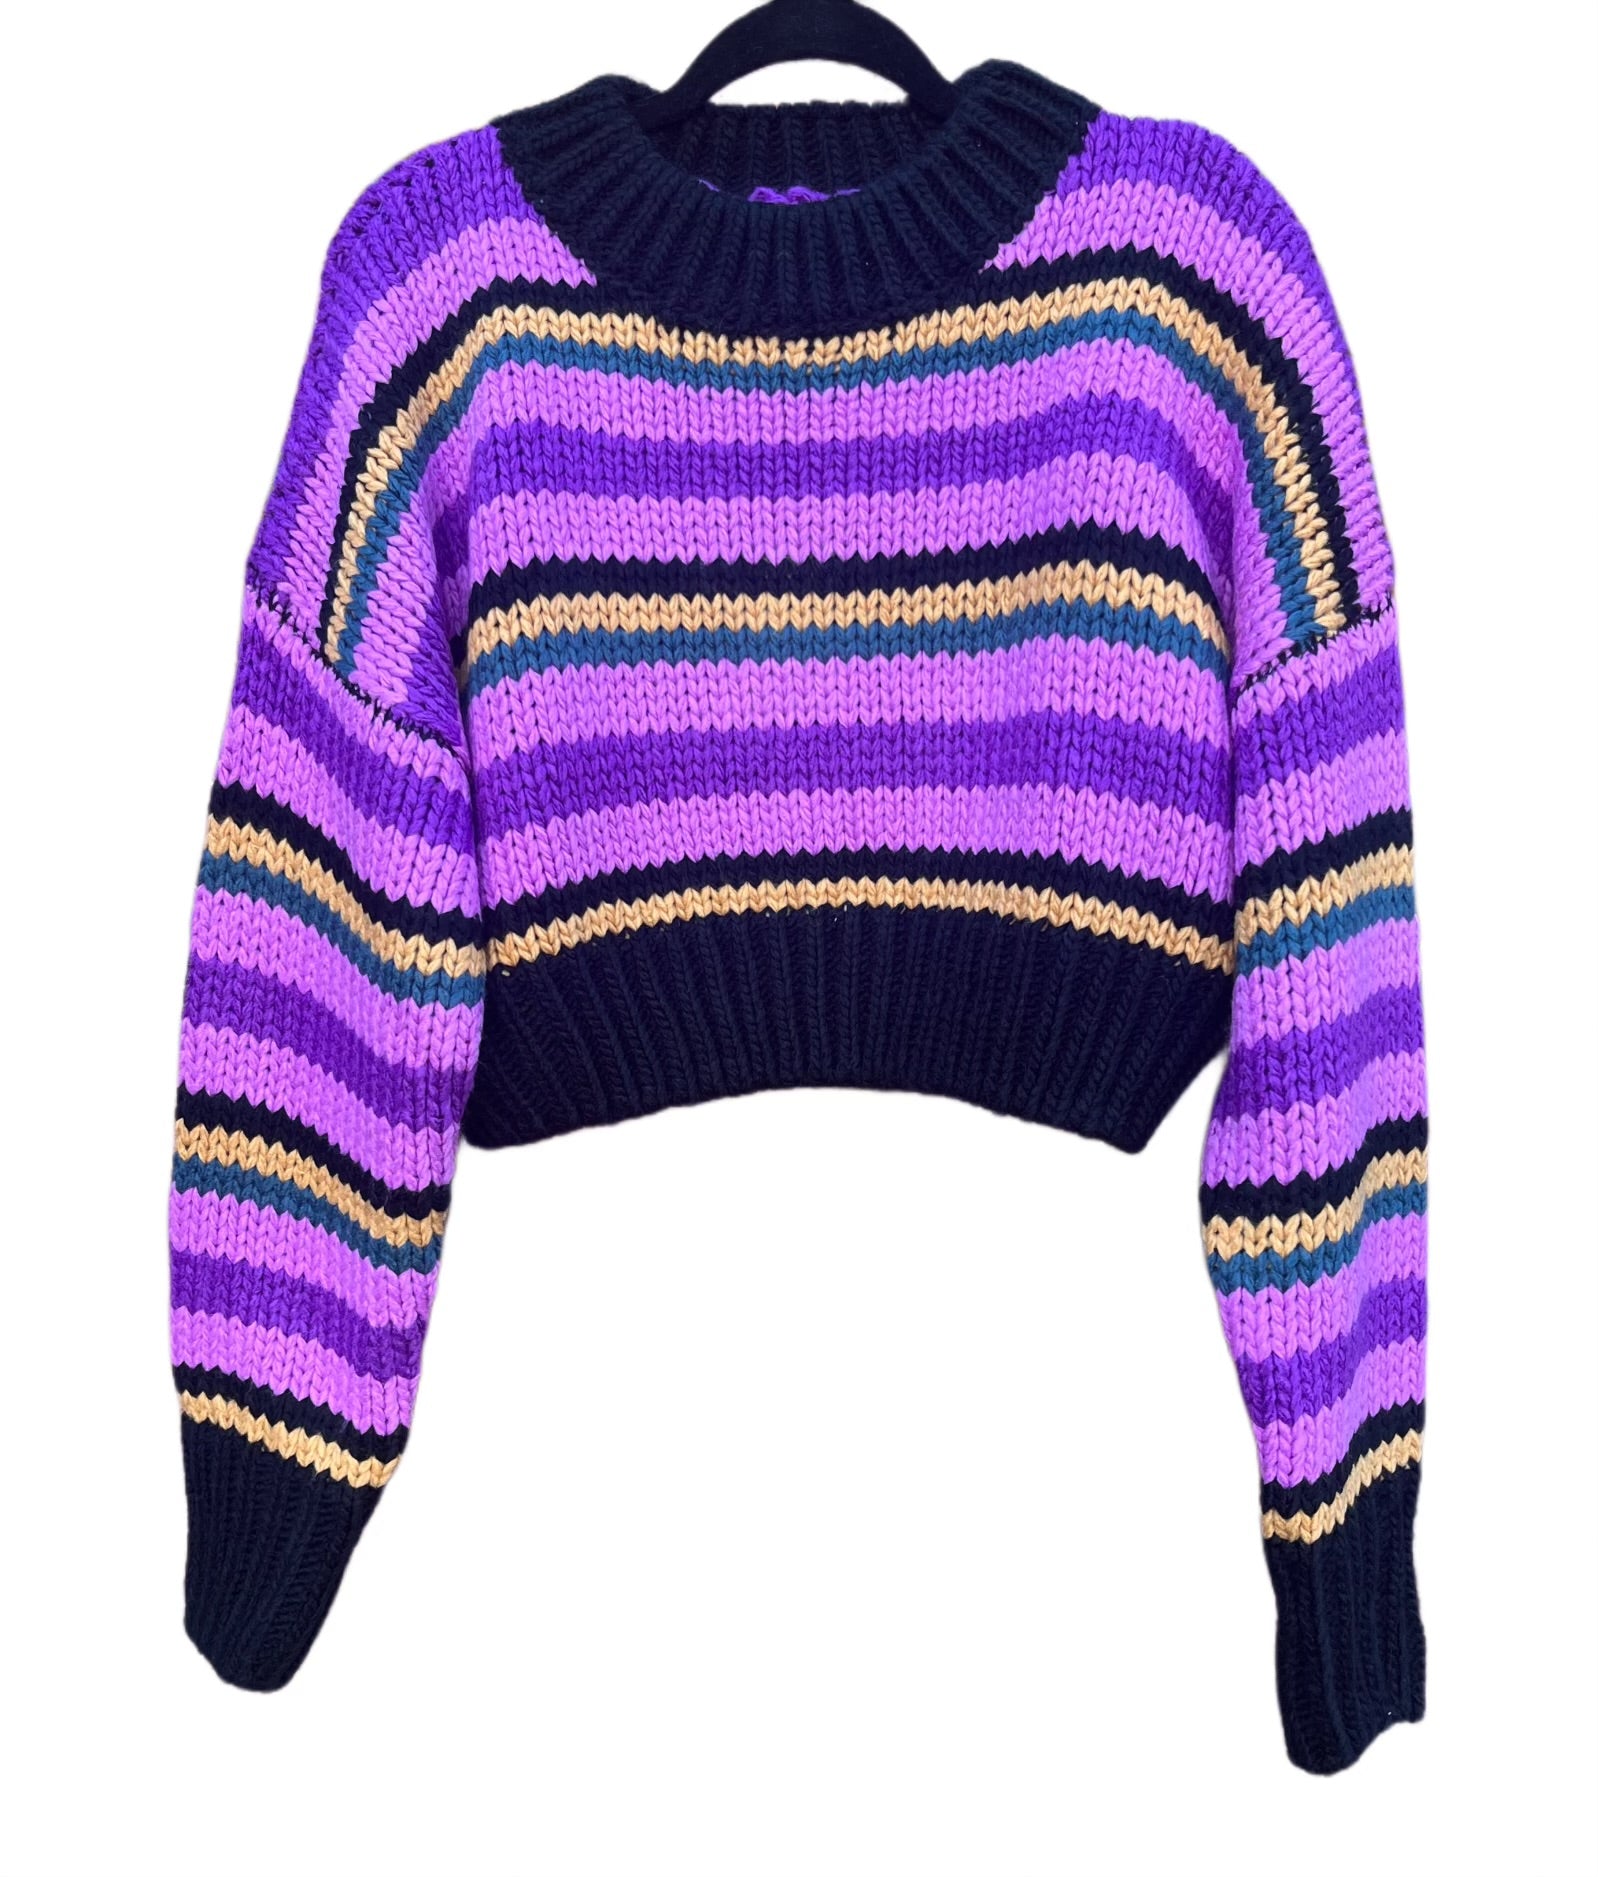 Cropped Womens Sweater Purple Striped Multi Color Elan Sweater at DiLaRu Boutique Nutley NJ